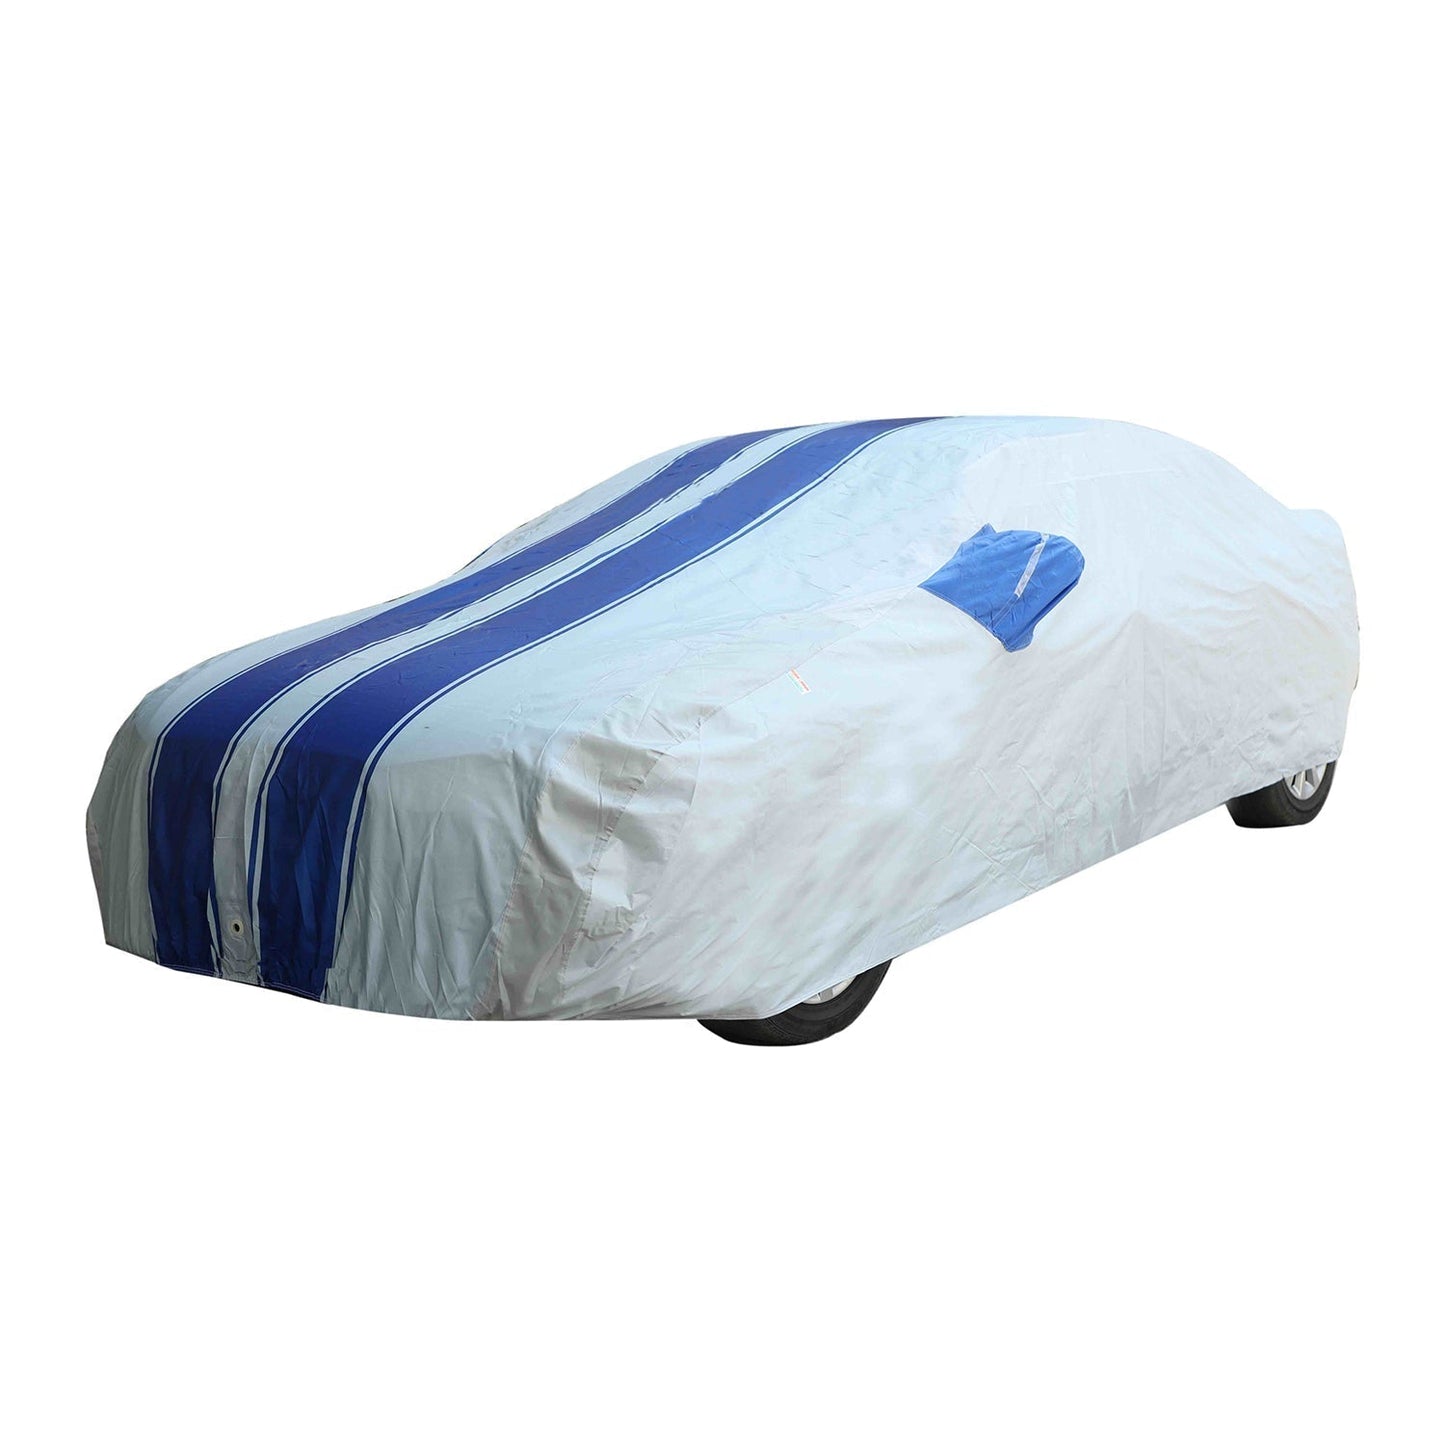 Oshotto 100% Blue dustproof and Water Resistant Car Body Cover with Mirror Pockets For Maruti Suzuki S-Presso